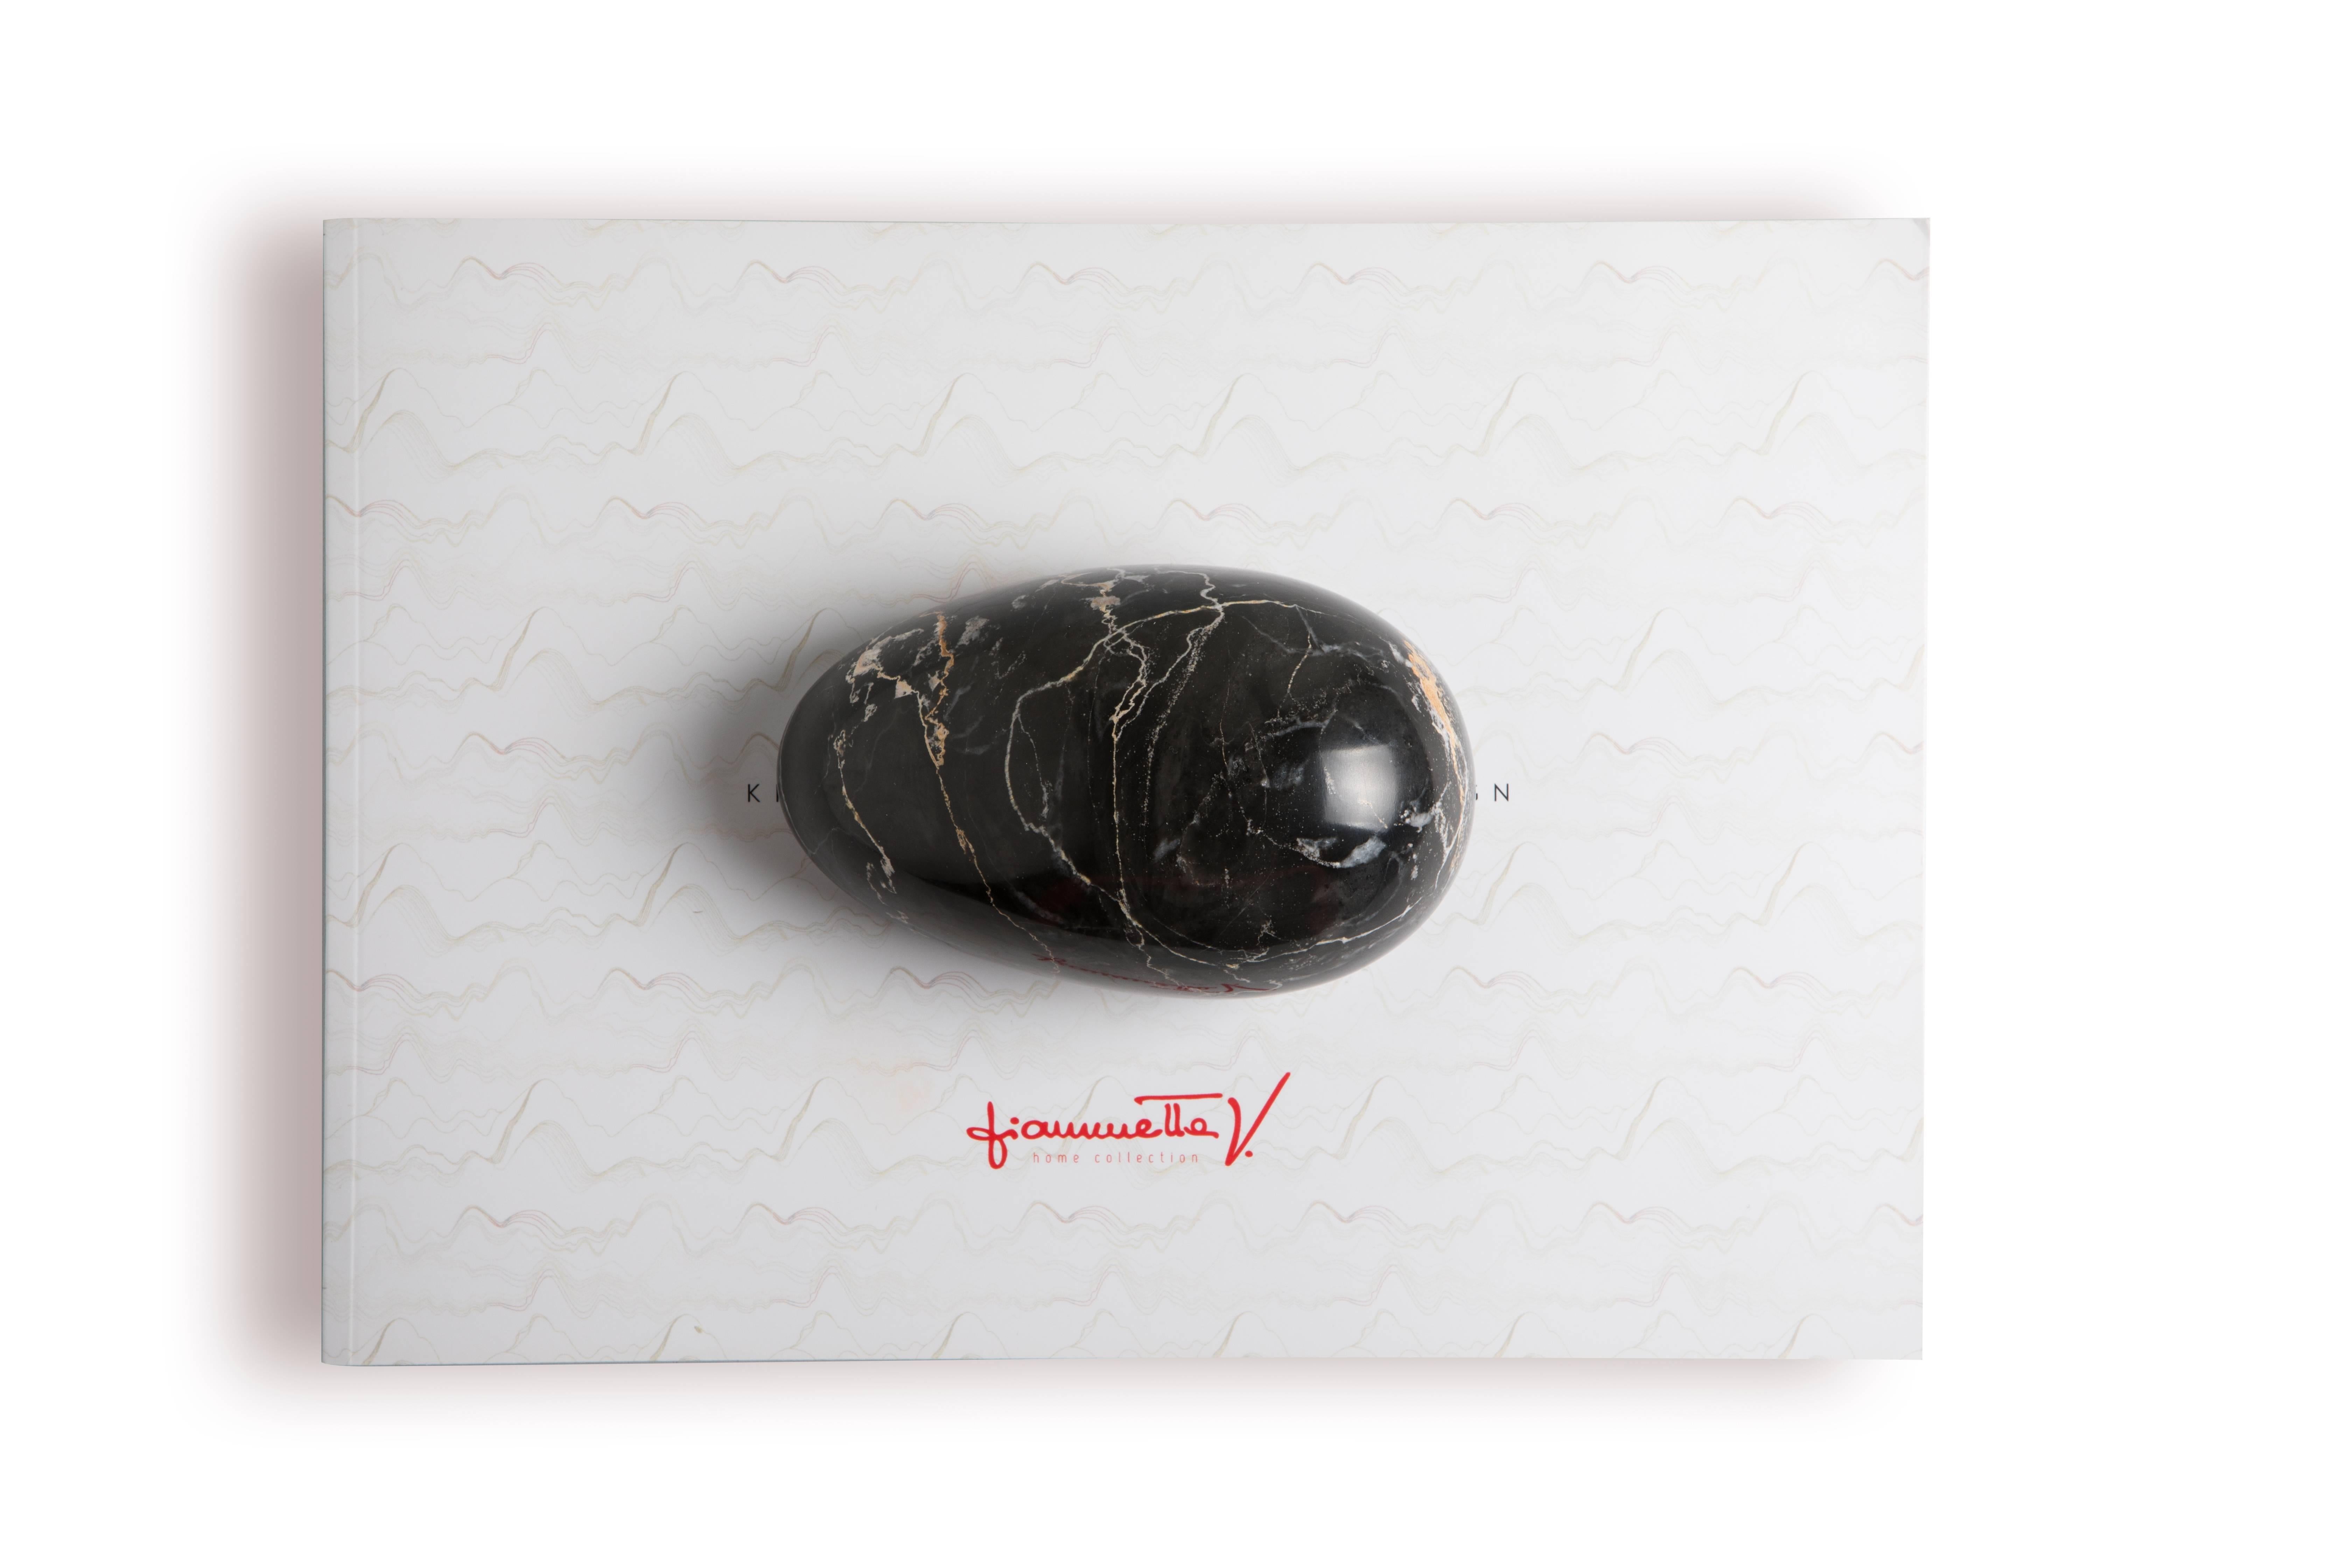 Black marble paperweight with mouse shape. Each piece is in a way unique (since each marble block is different in veins and shades) and handcrafted in Italy. Slight variations in shape, color and size are to be considered a guarantee of an